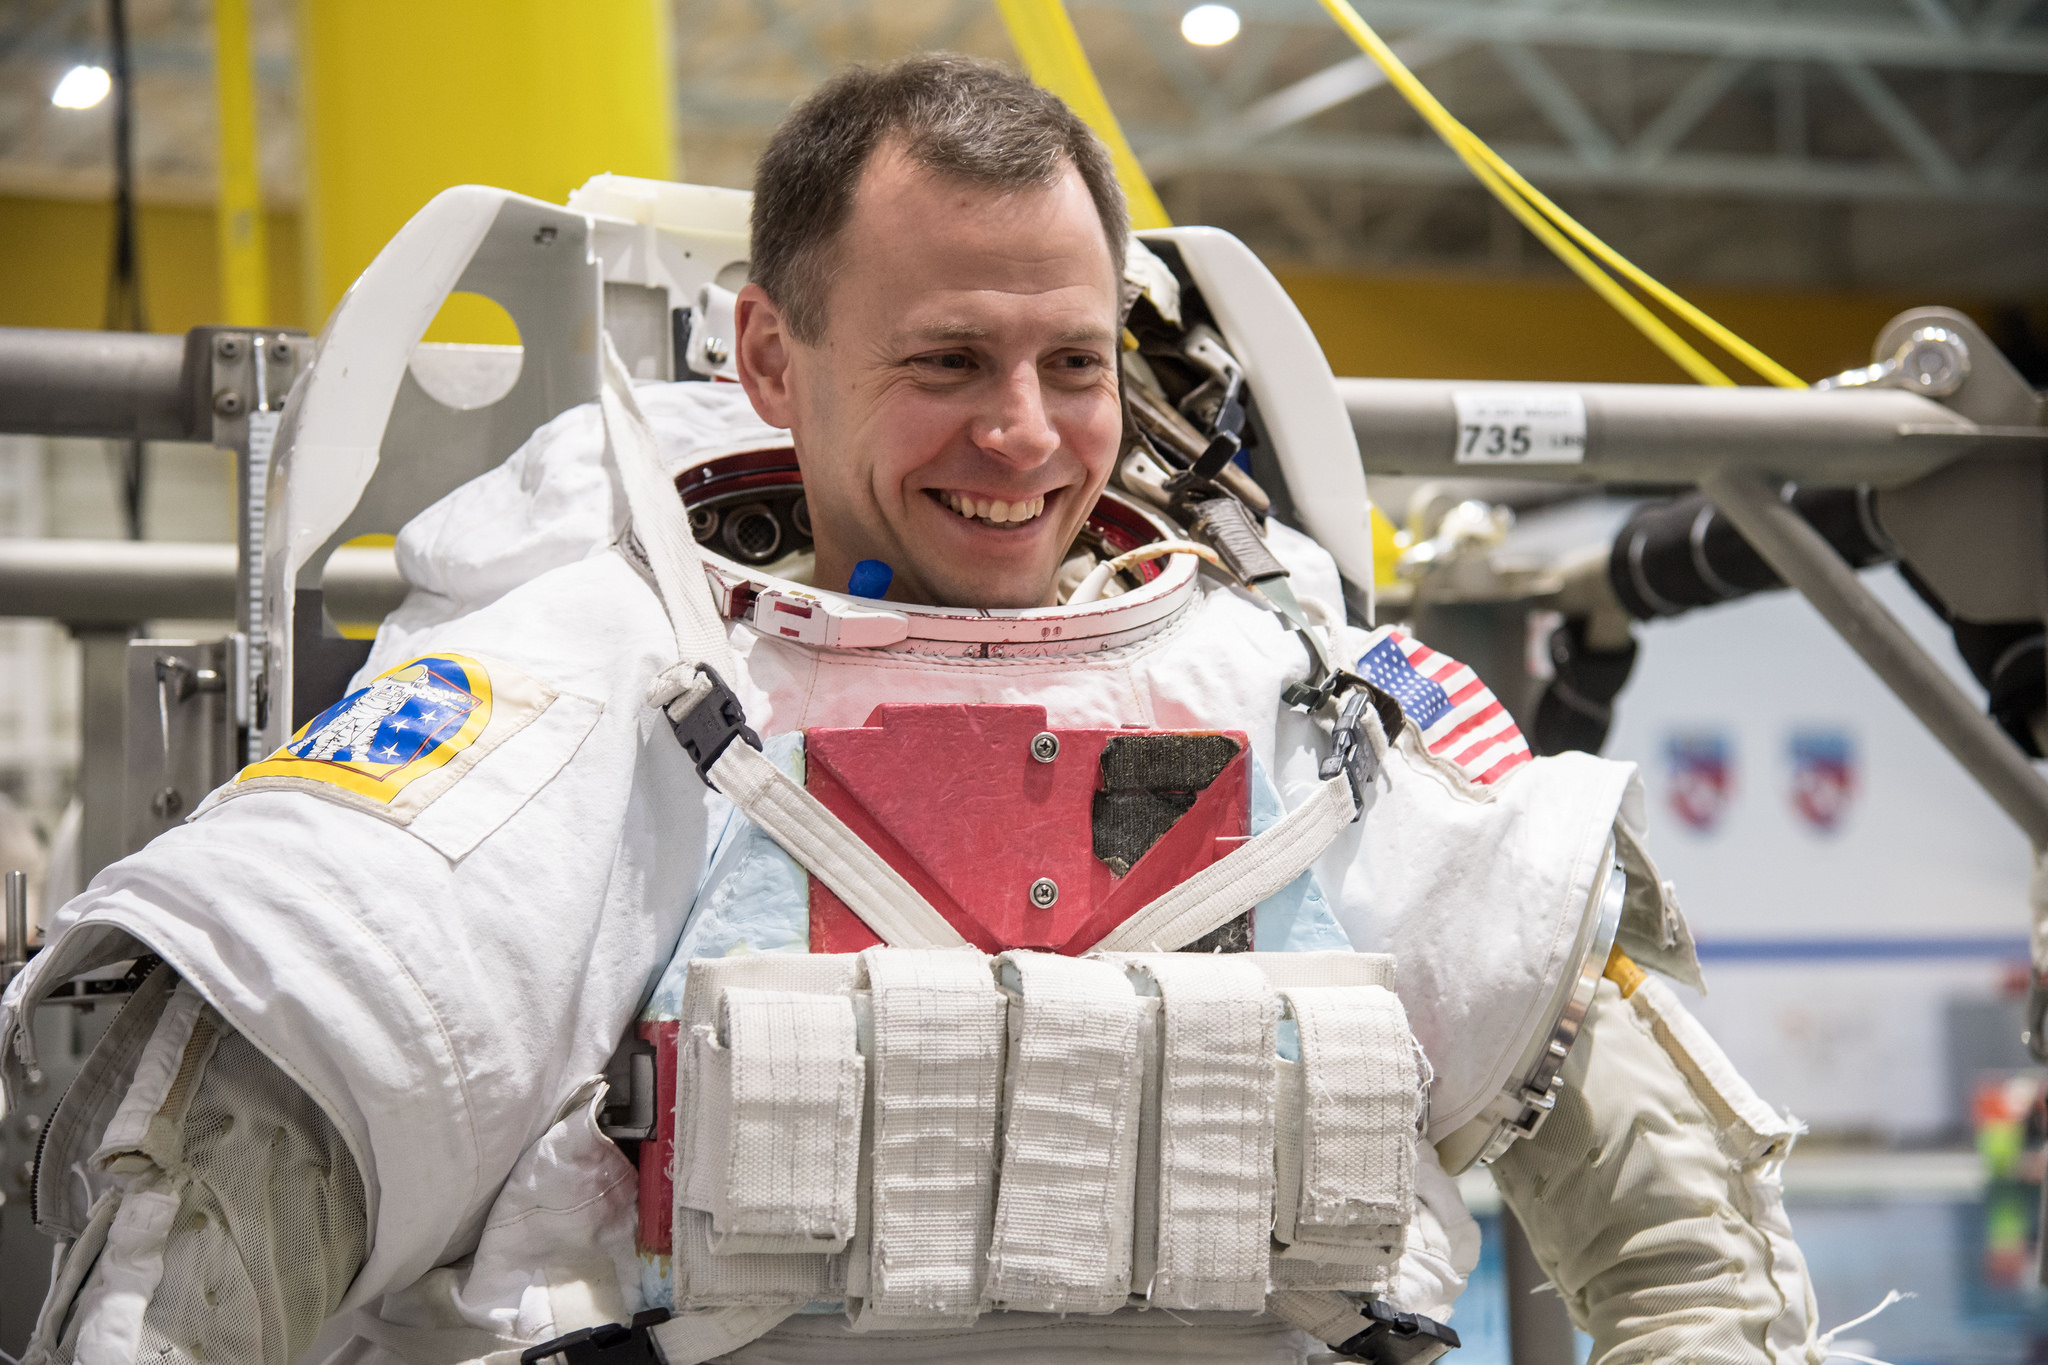 NASA astronaut Nick Hague, seen here getting into a spacesuit for spacewalk training on Dec. 7, 2017.